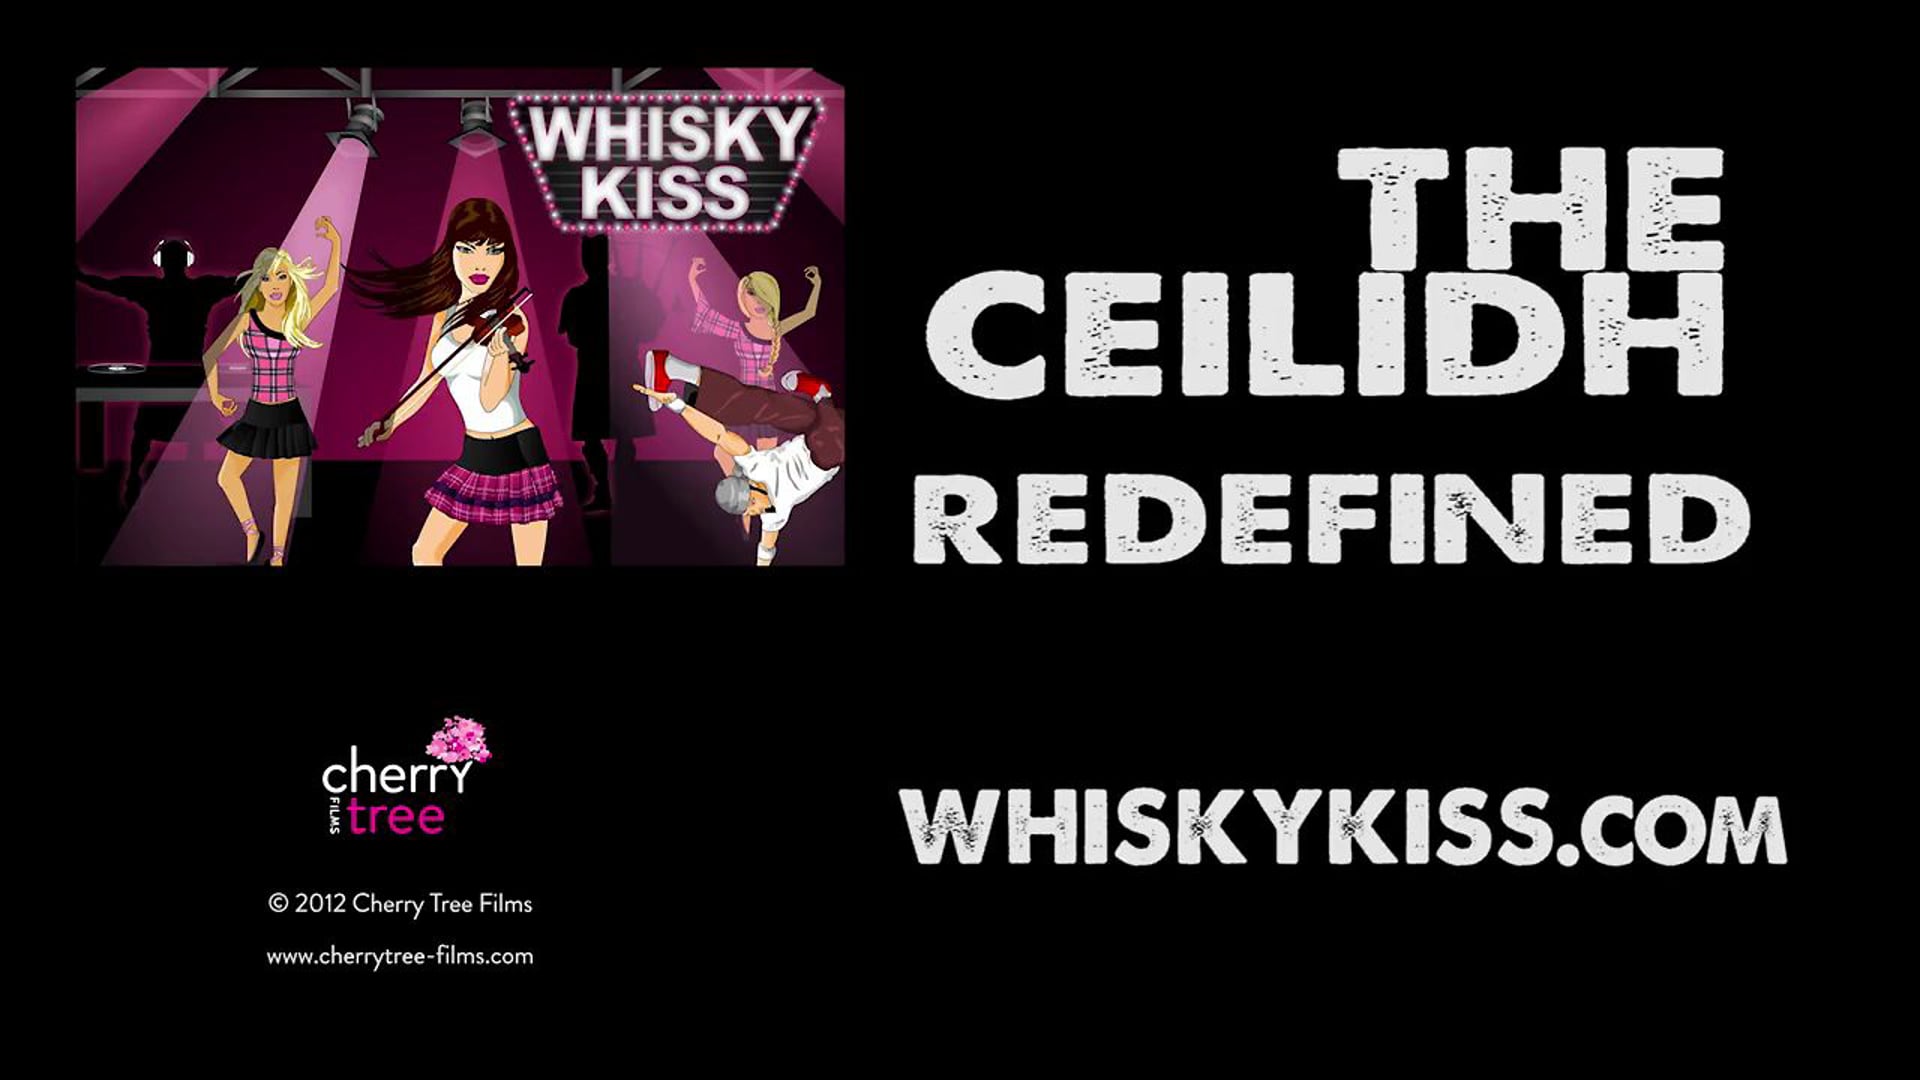 Ceilidh Redefined